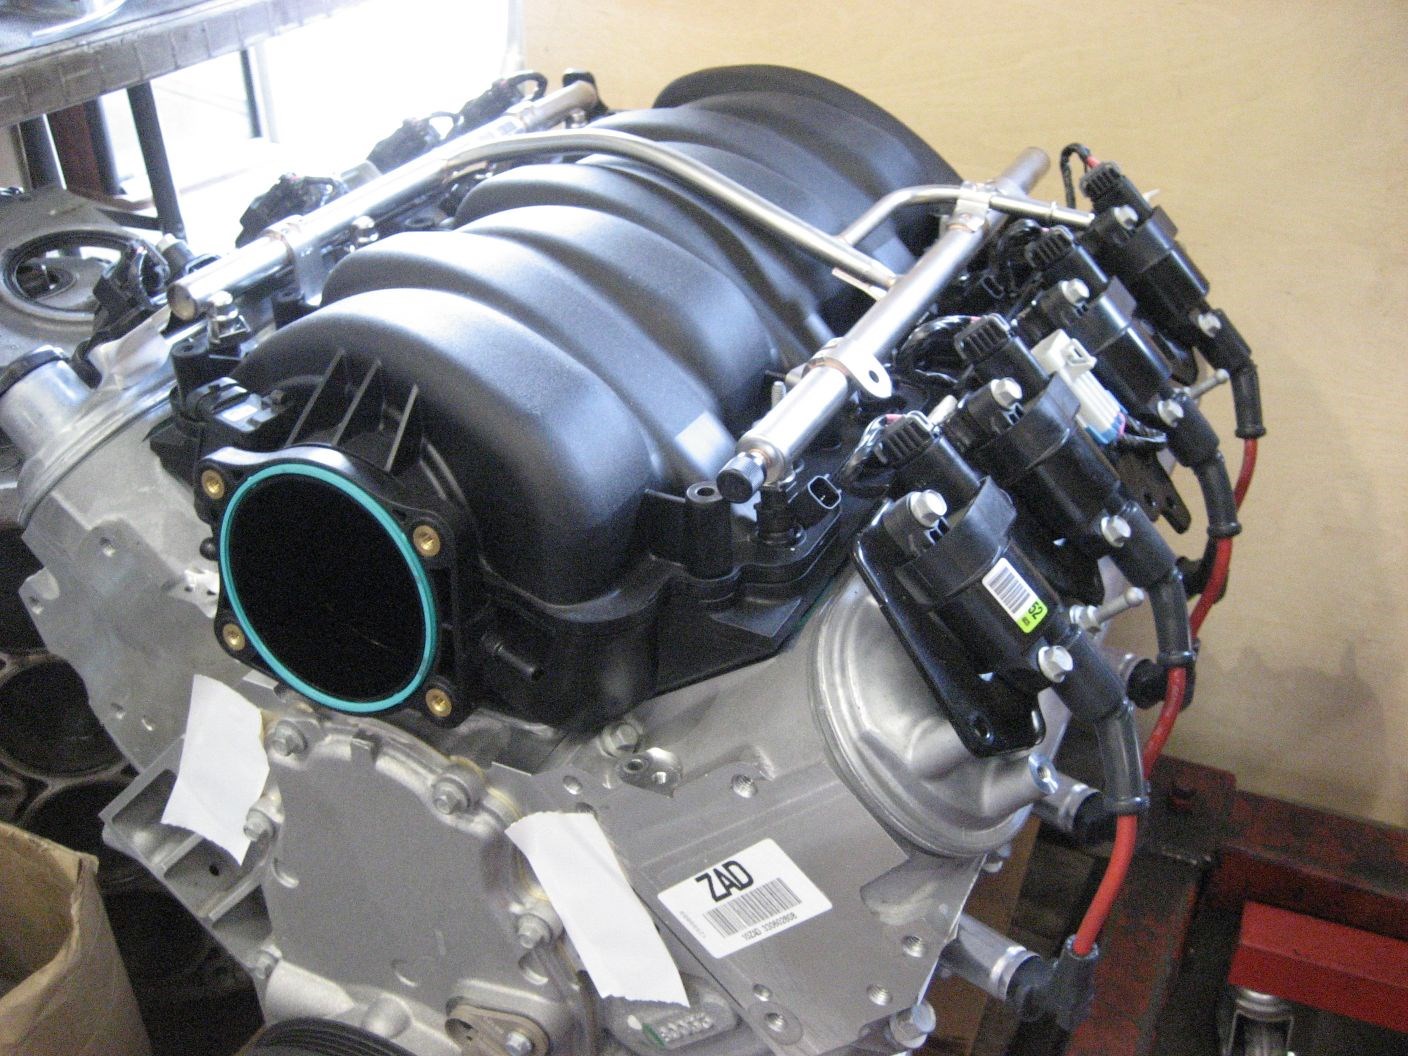 Water-Cooled System vs. Air-Cooled Comparison.  Air-Cooled System